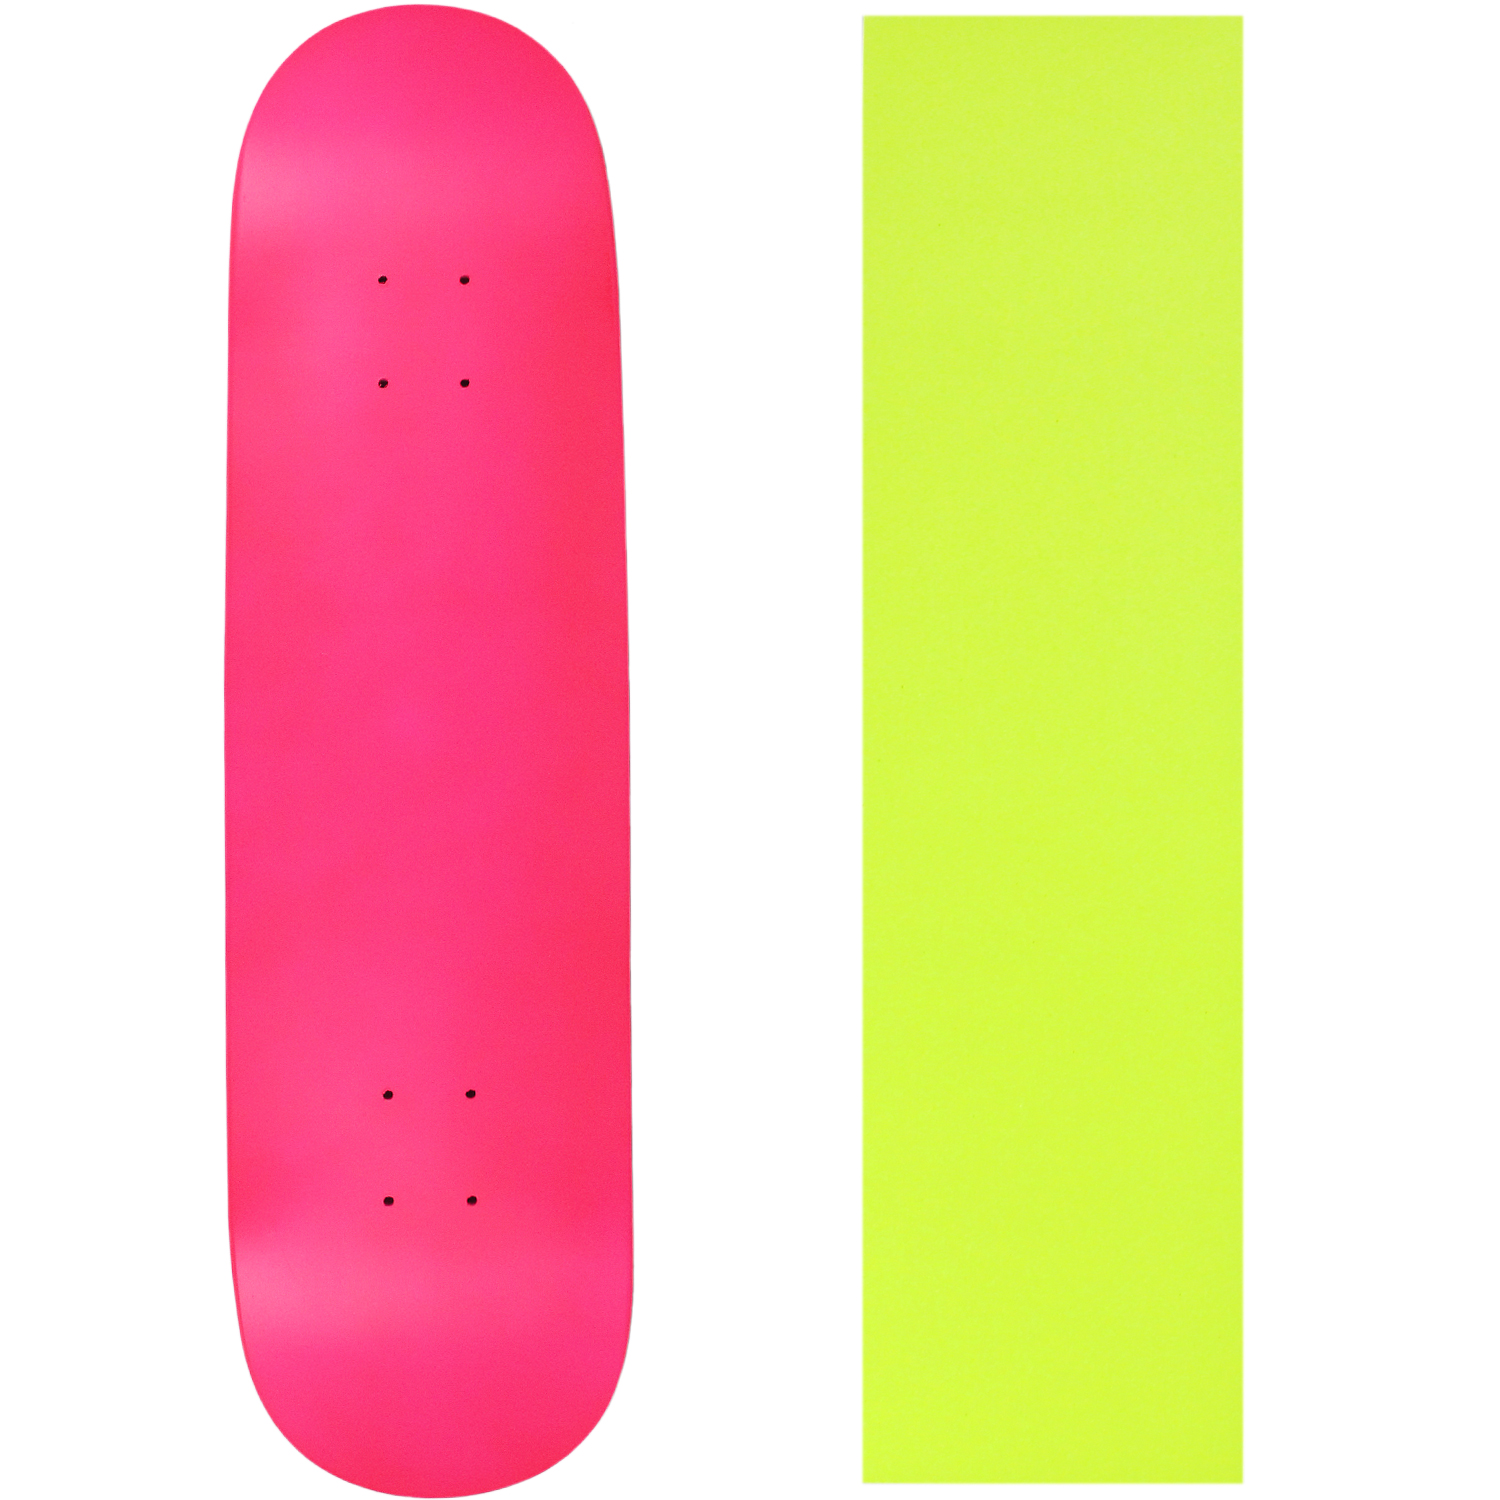 Skateboard Deck Pro 7-Ply Canadian Maple NEON PINK With Griptape 7.5" - 8.5" - image 1 of 1